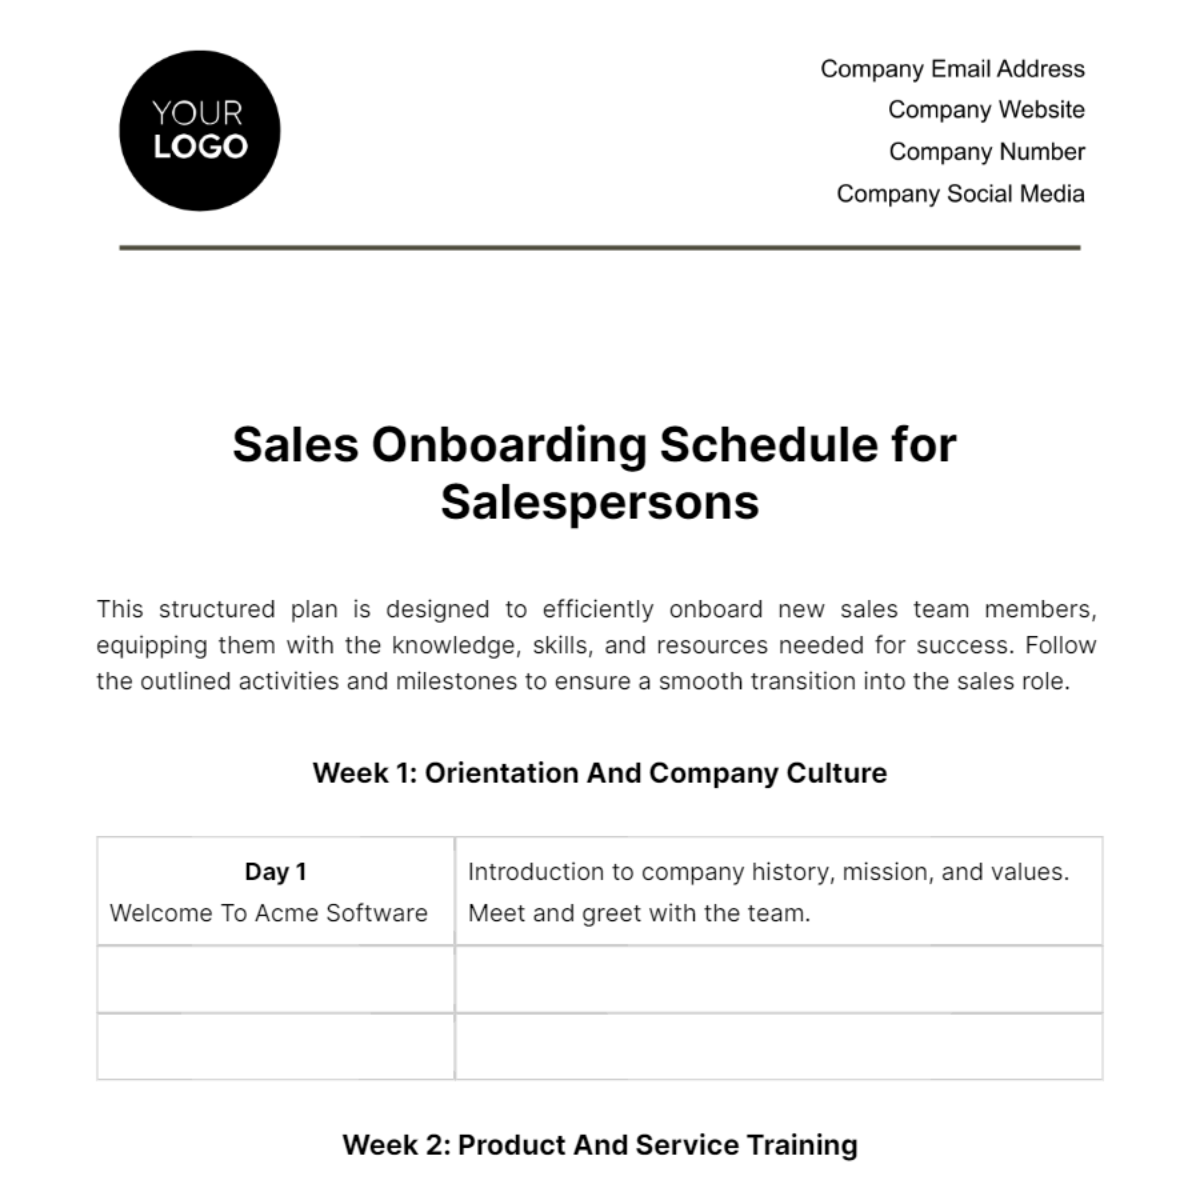 Sales Onboarding Schedule for Salespersons Template